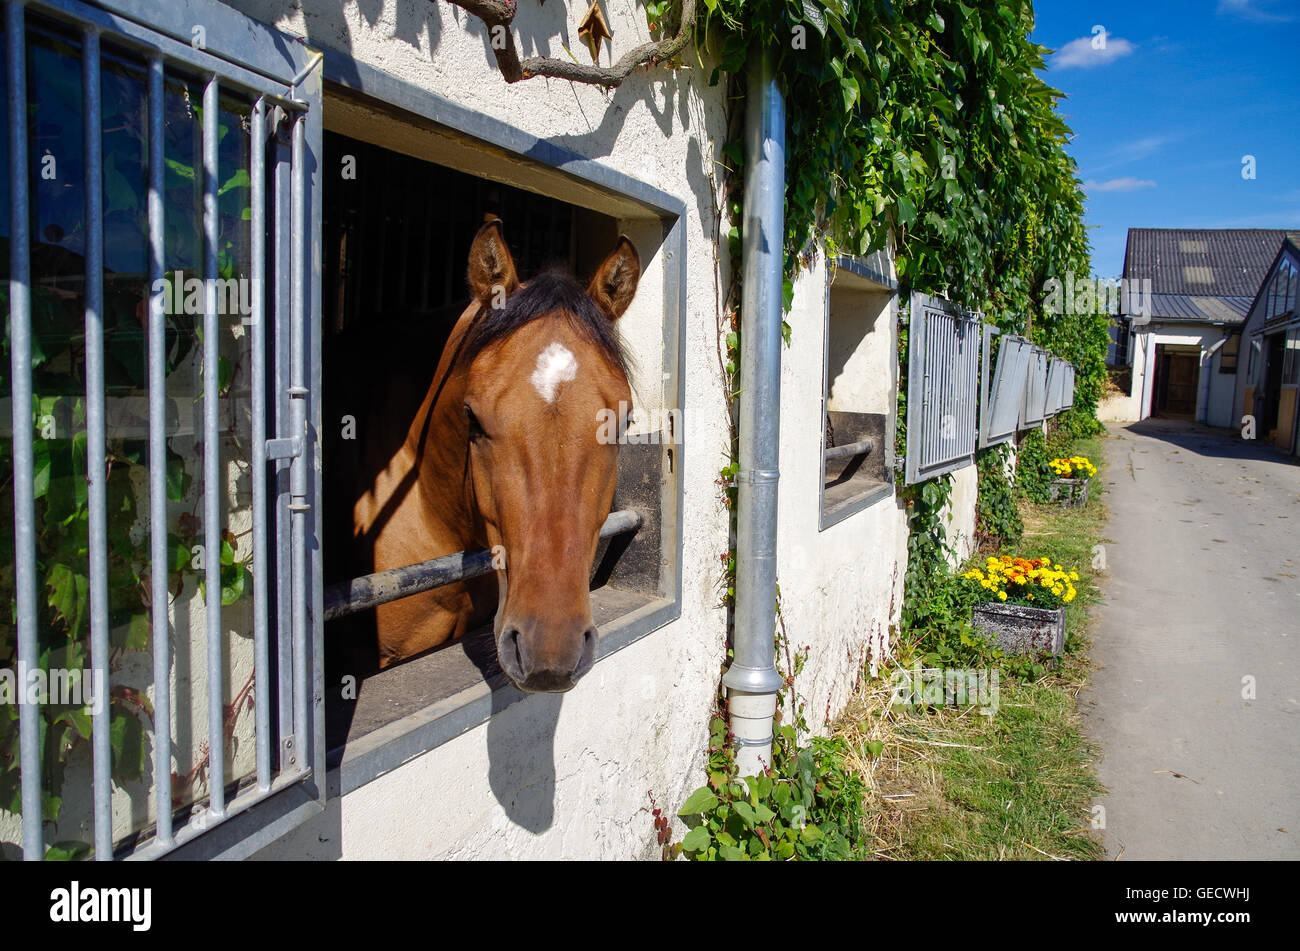 A Chestnut Horse With A White Star Looking Out Of His Stable Box In A Stock Photo Alamy